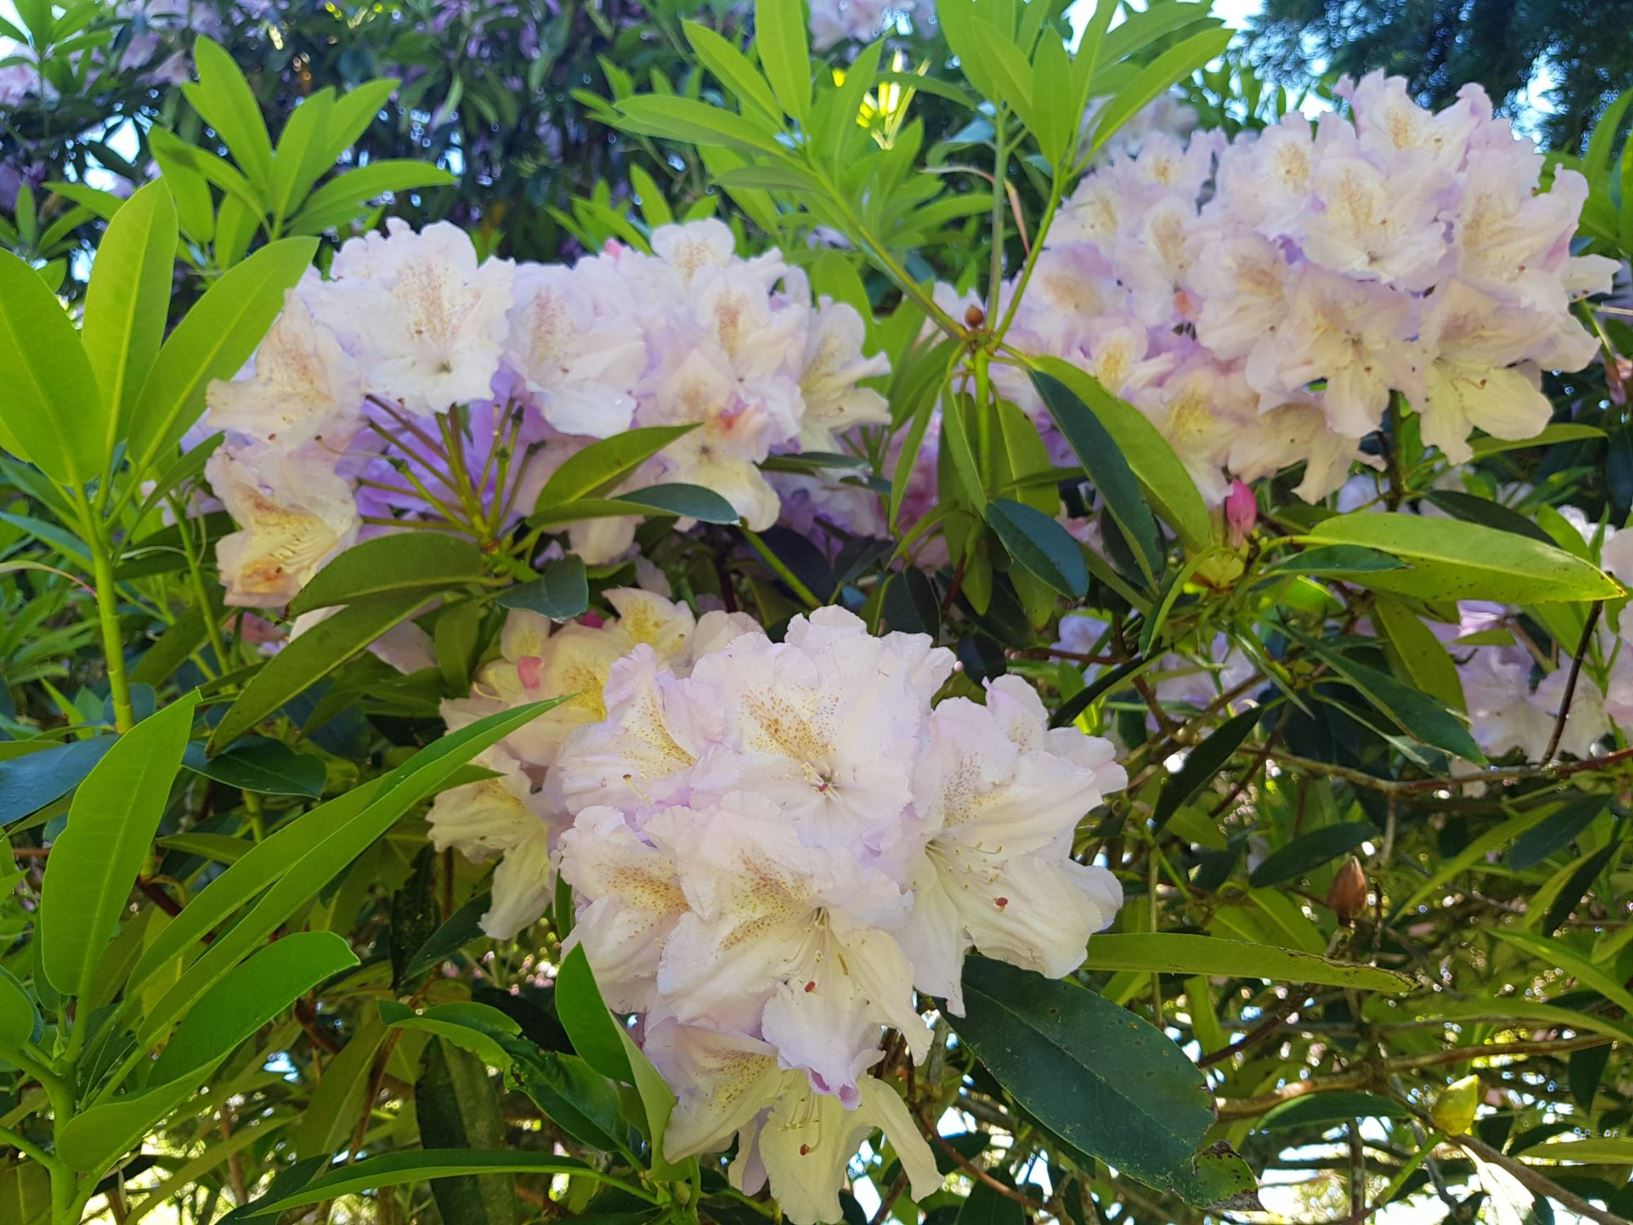 Rhododendron 'Lavender Girl'